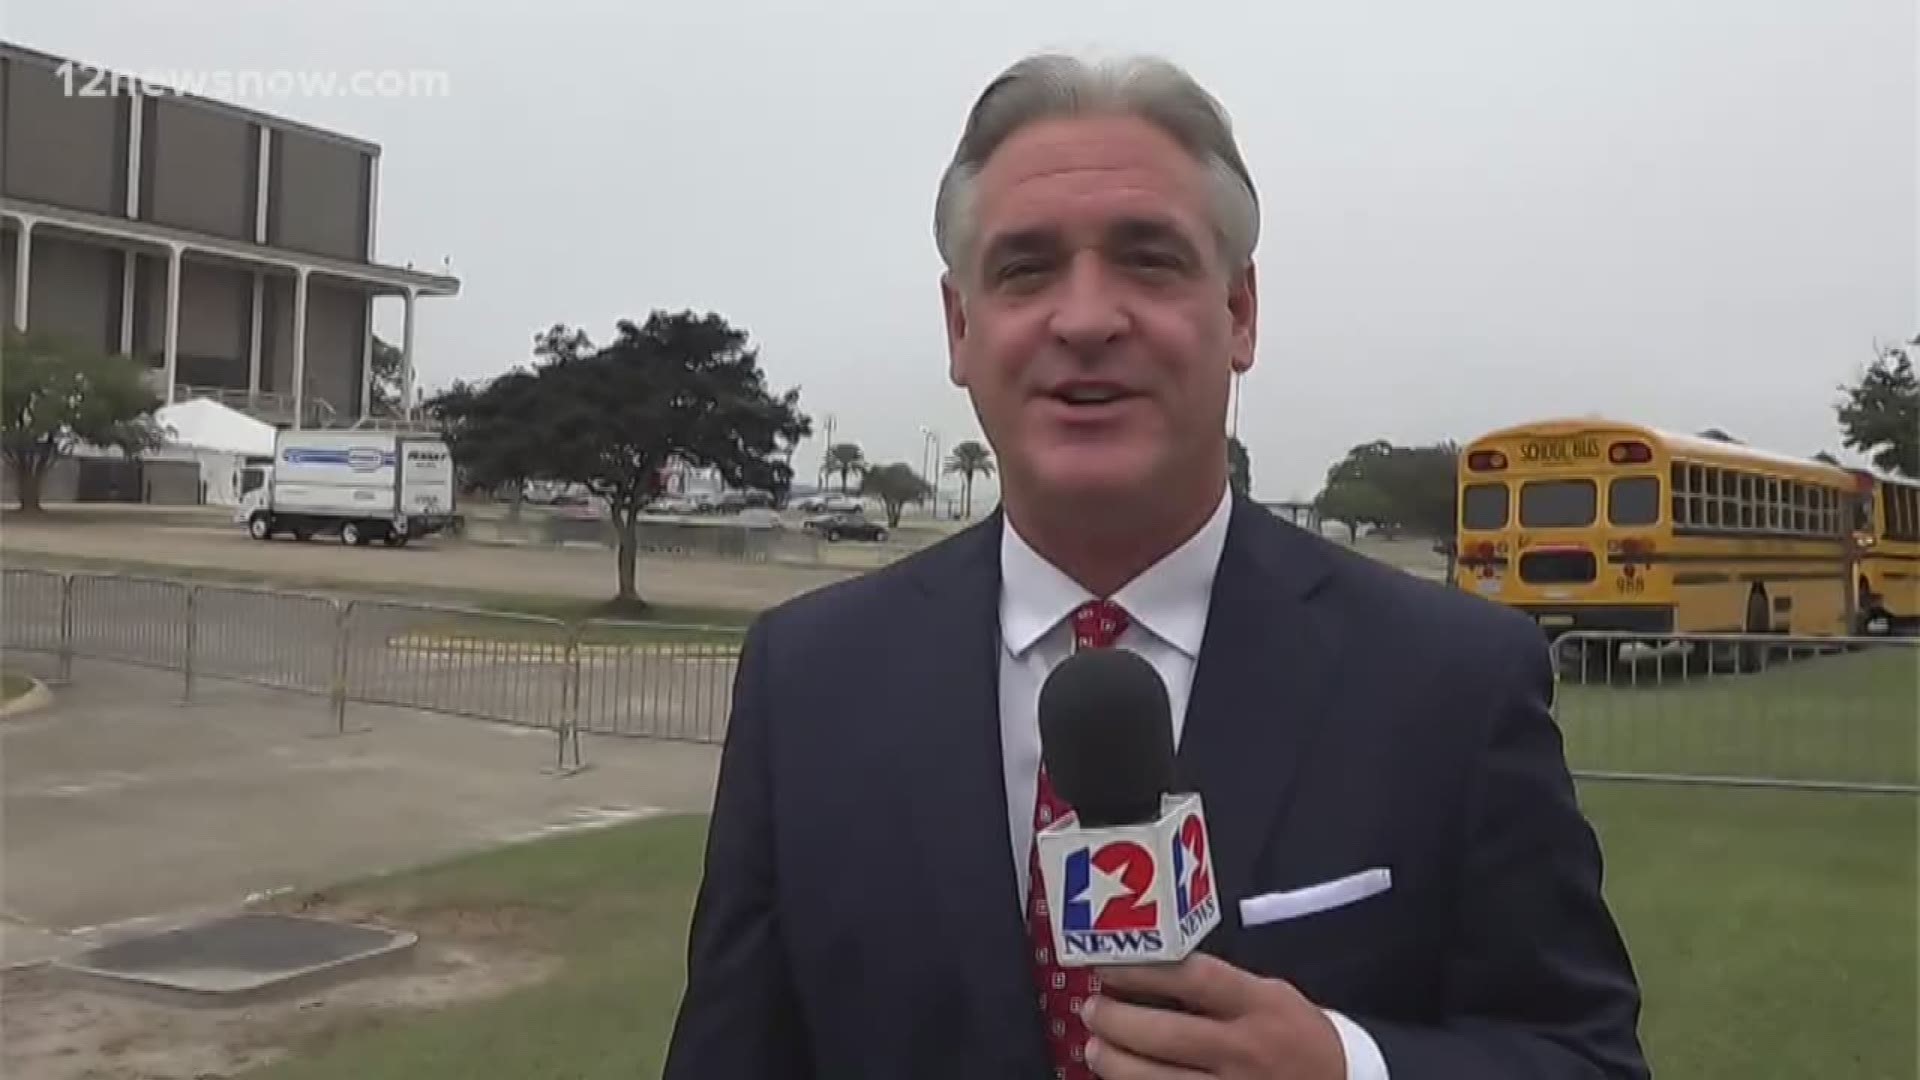 President Trump is scheduled to host a rally in Lake Charles tonight ahead of the state's gubernatorial race. 12News anchor Kevin Steele is on site.